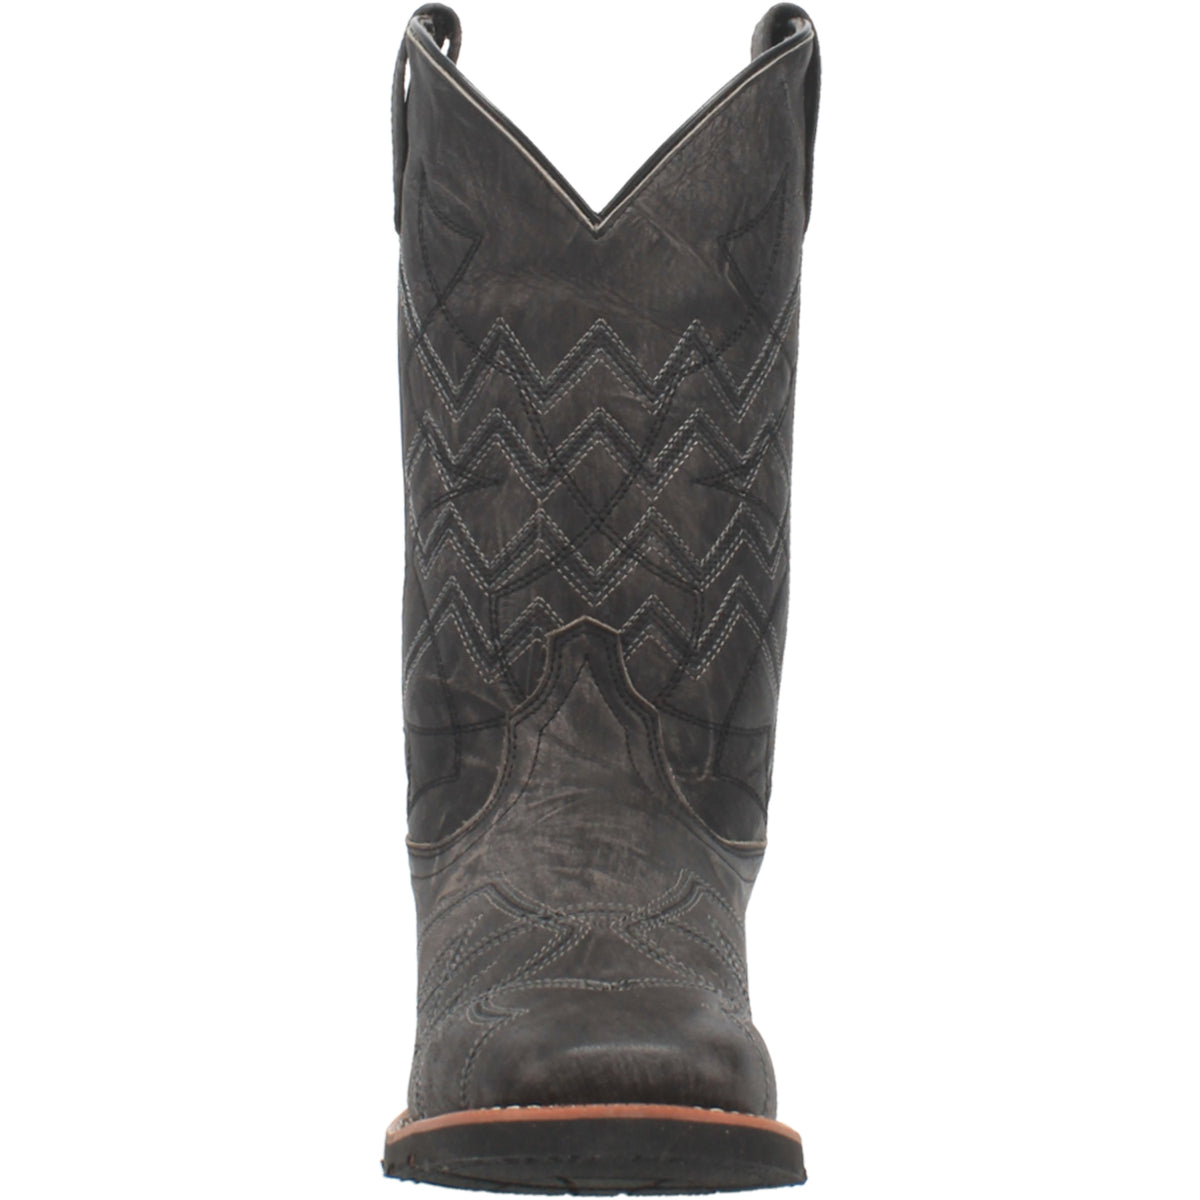 AXEL LEATHER BOOT Cover